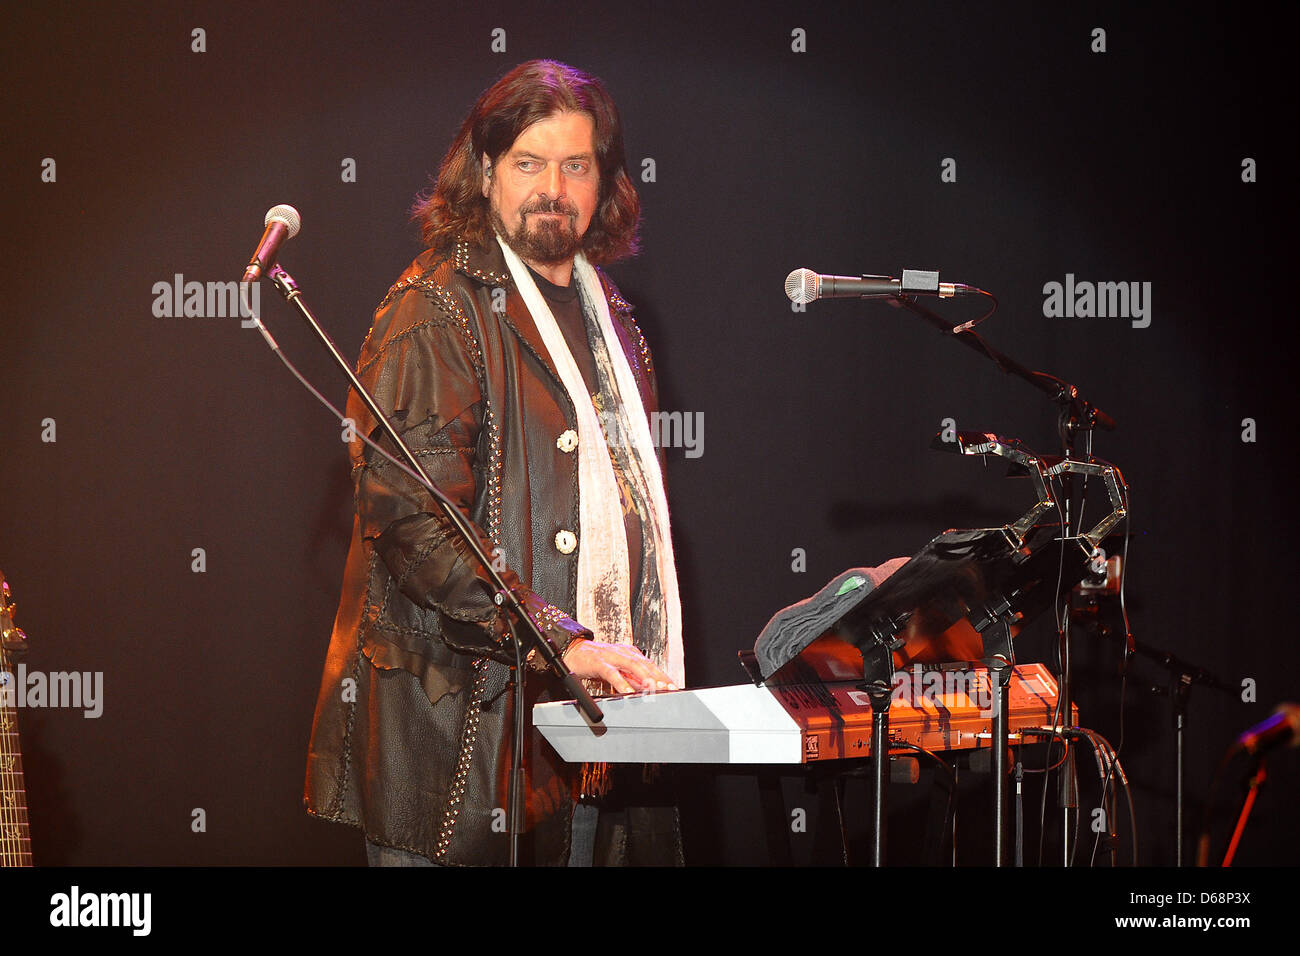 British musician Alan Parsons performs on stage during The Alan Parsons Live Project tour 2012 at Circus Krone in Munich, Germany, 19 July 2012. Photo: Revierfoto Stock Photo